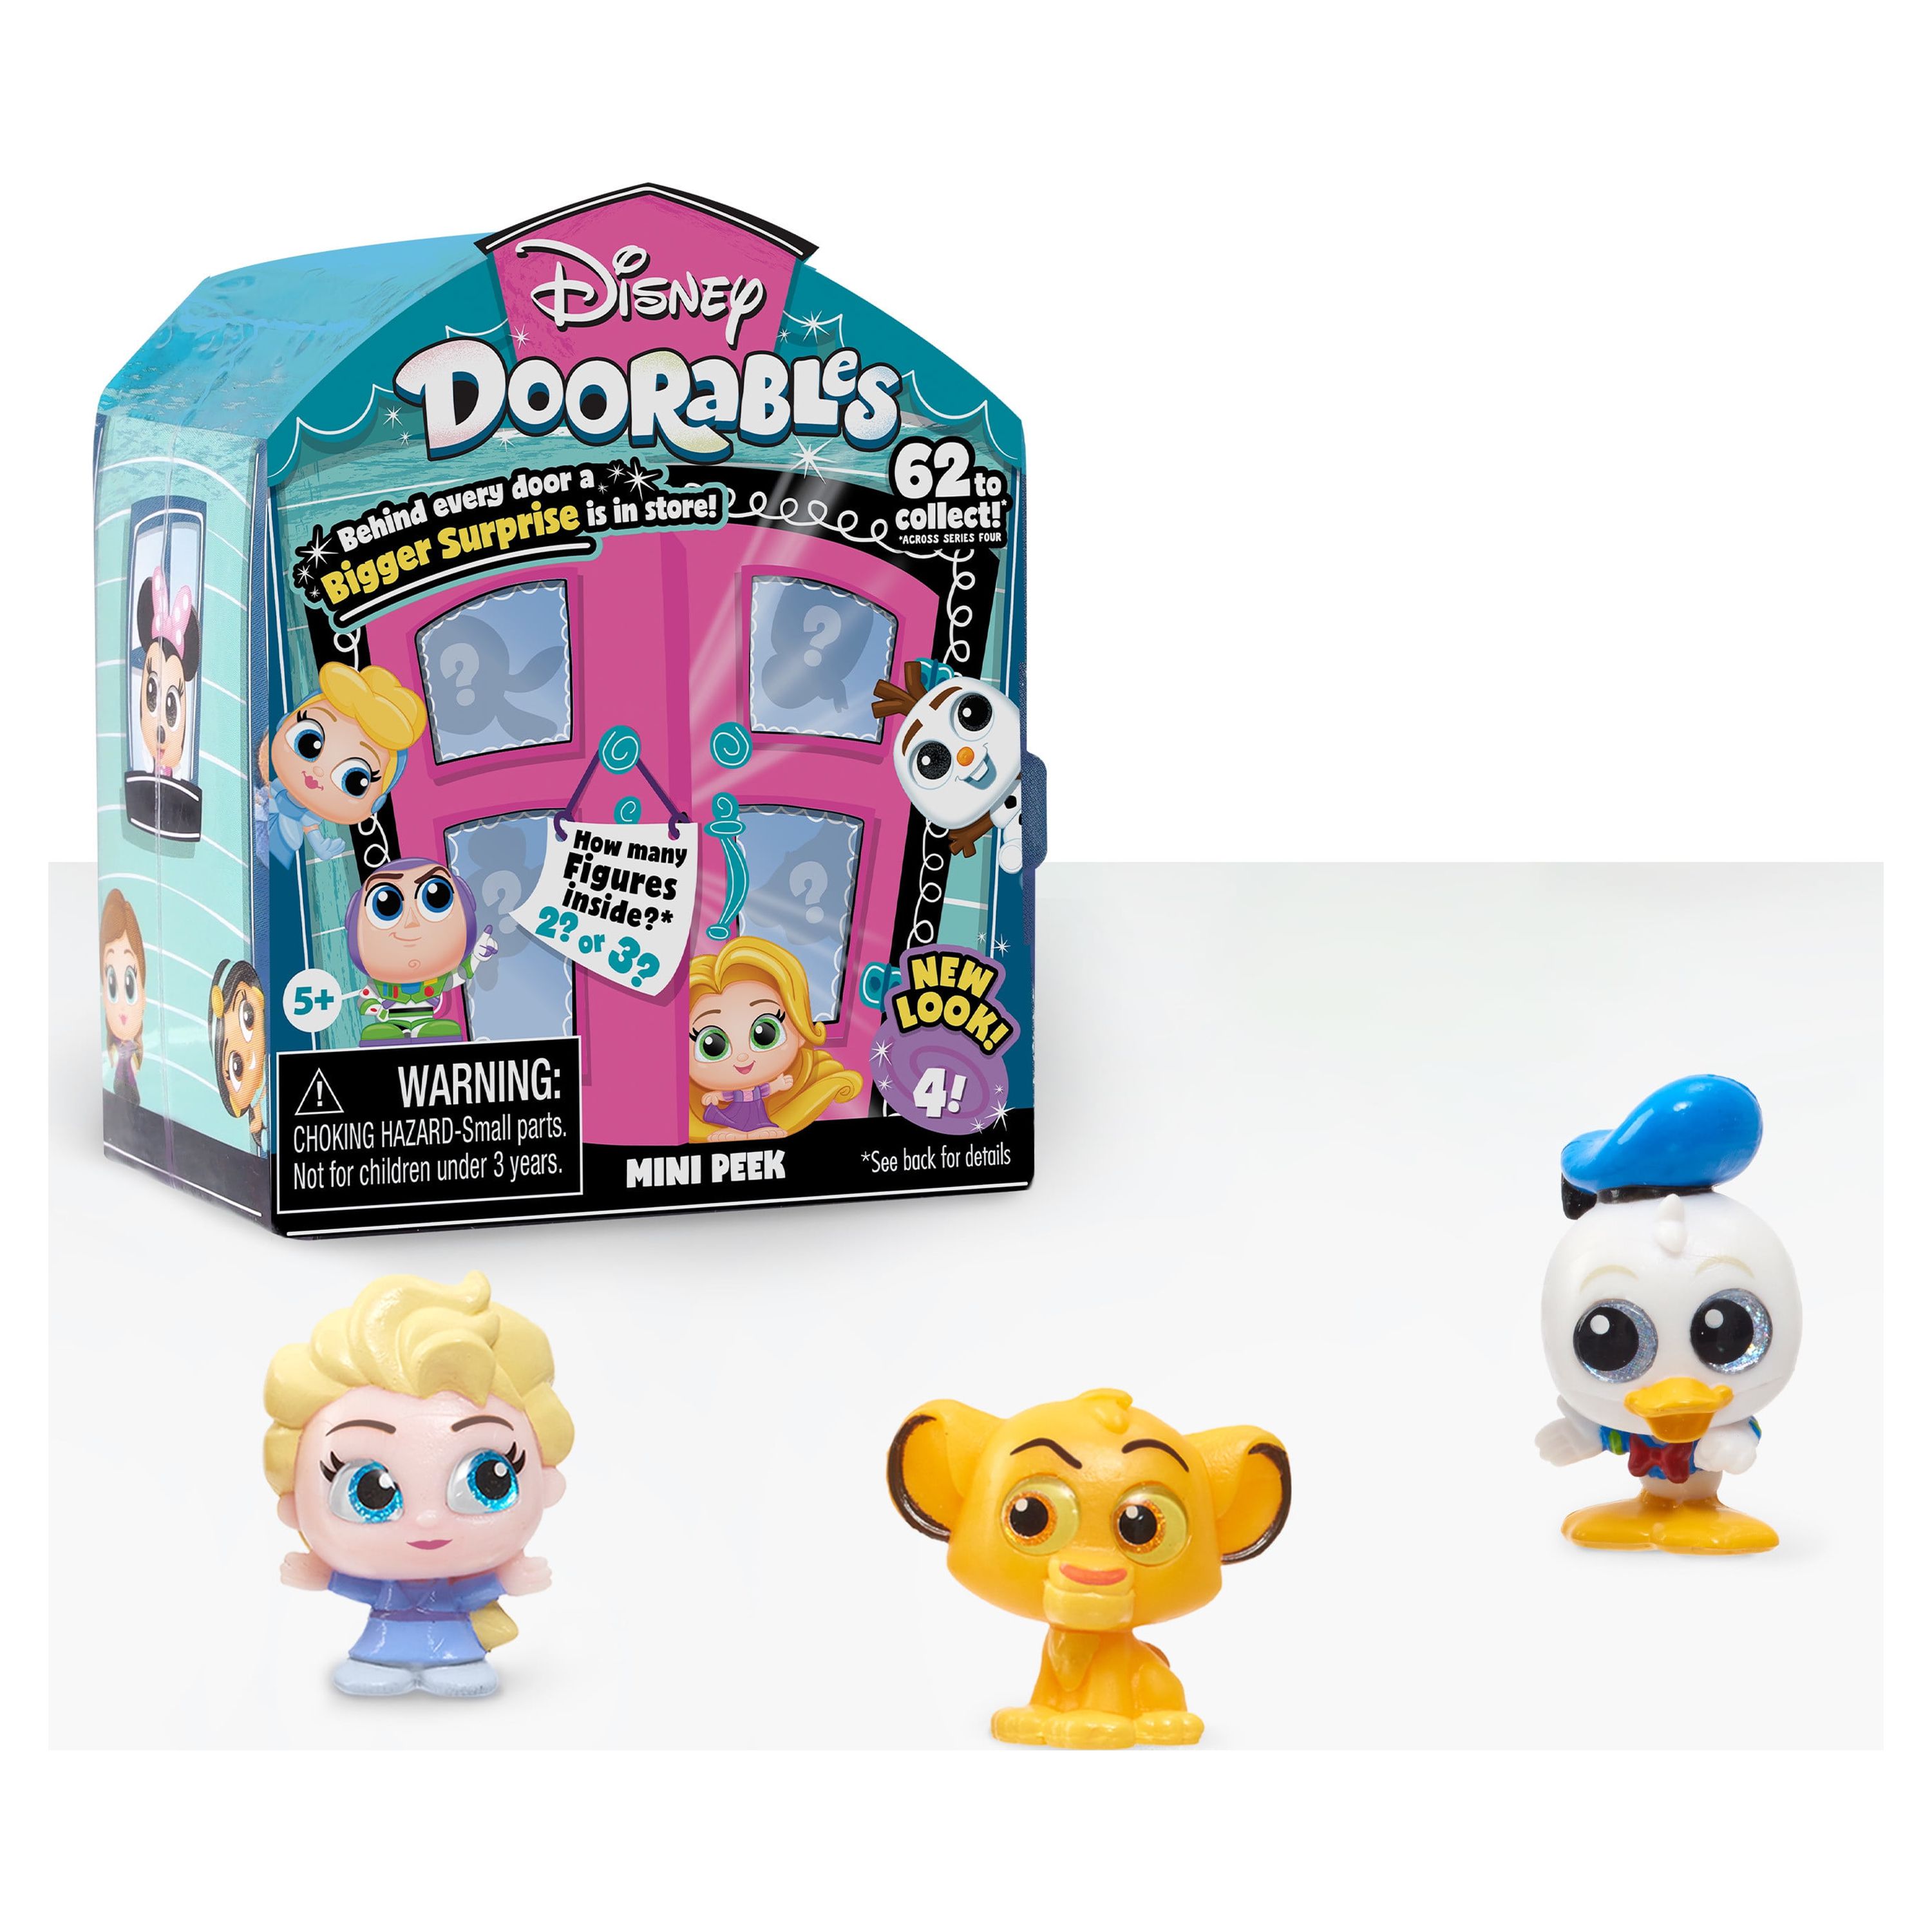 Disney Doorables Mini-Peek Pack Series 4, Officially Licensed Kids Toys for Ages 5 Up, Gifts and Presents - image 1 of 3